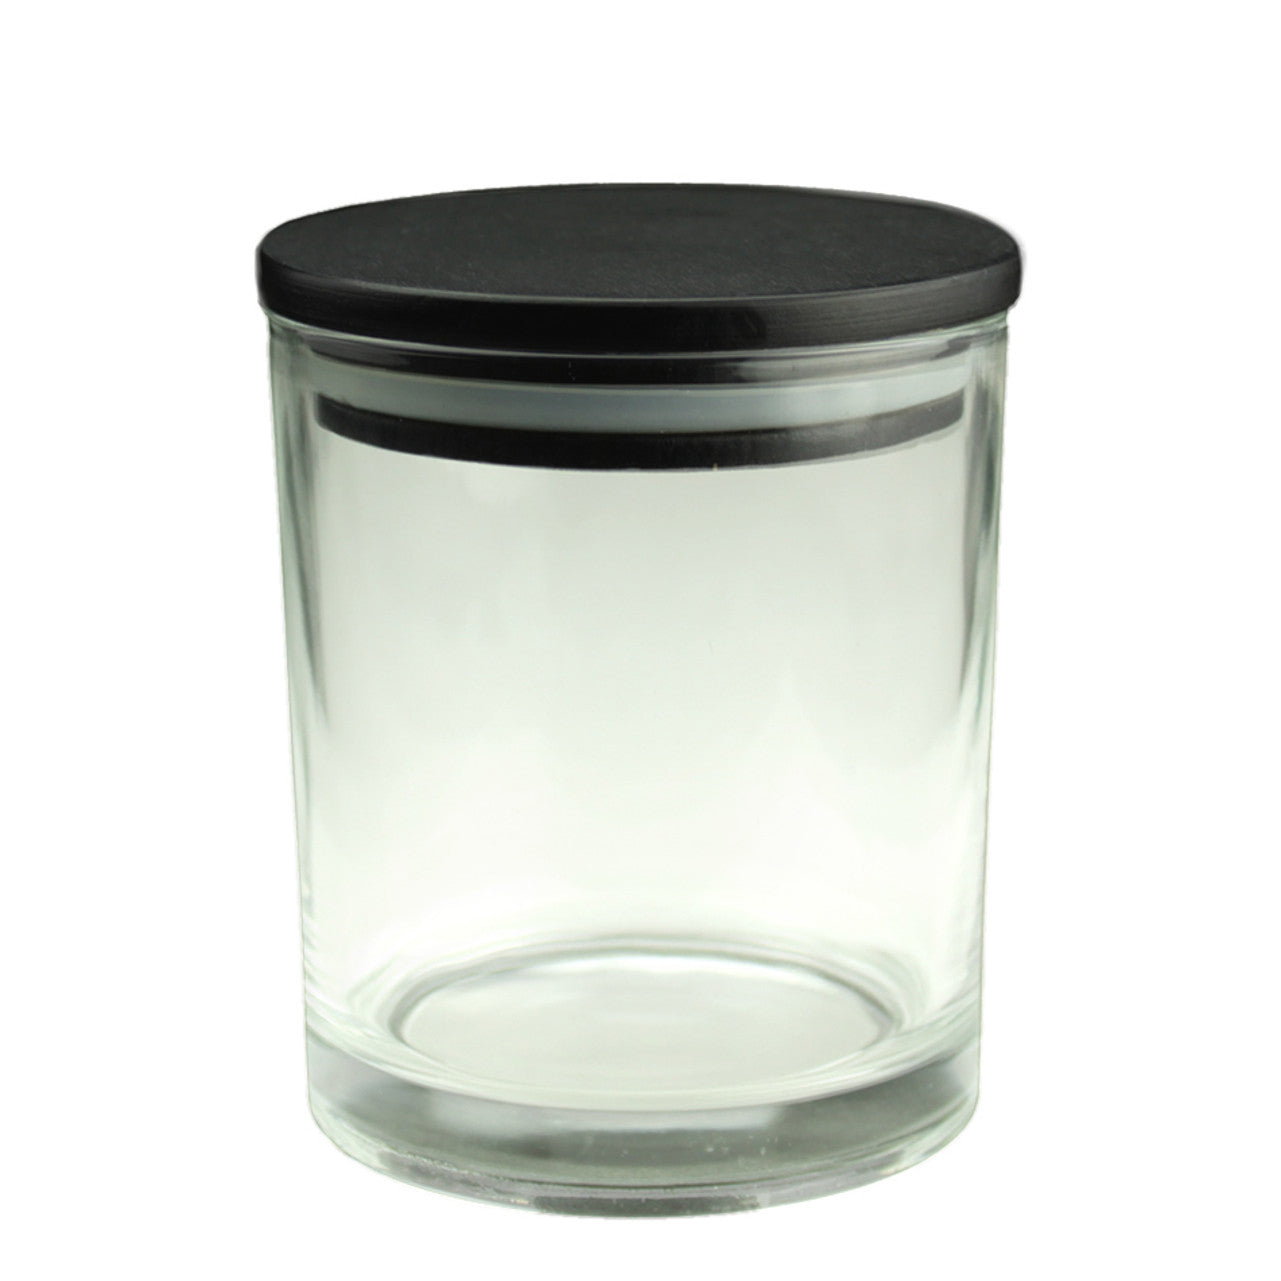 7 oz. clear upgrade vessel with black wood lid